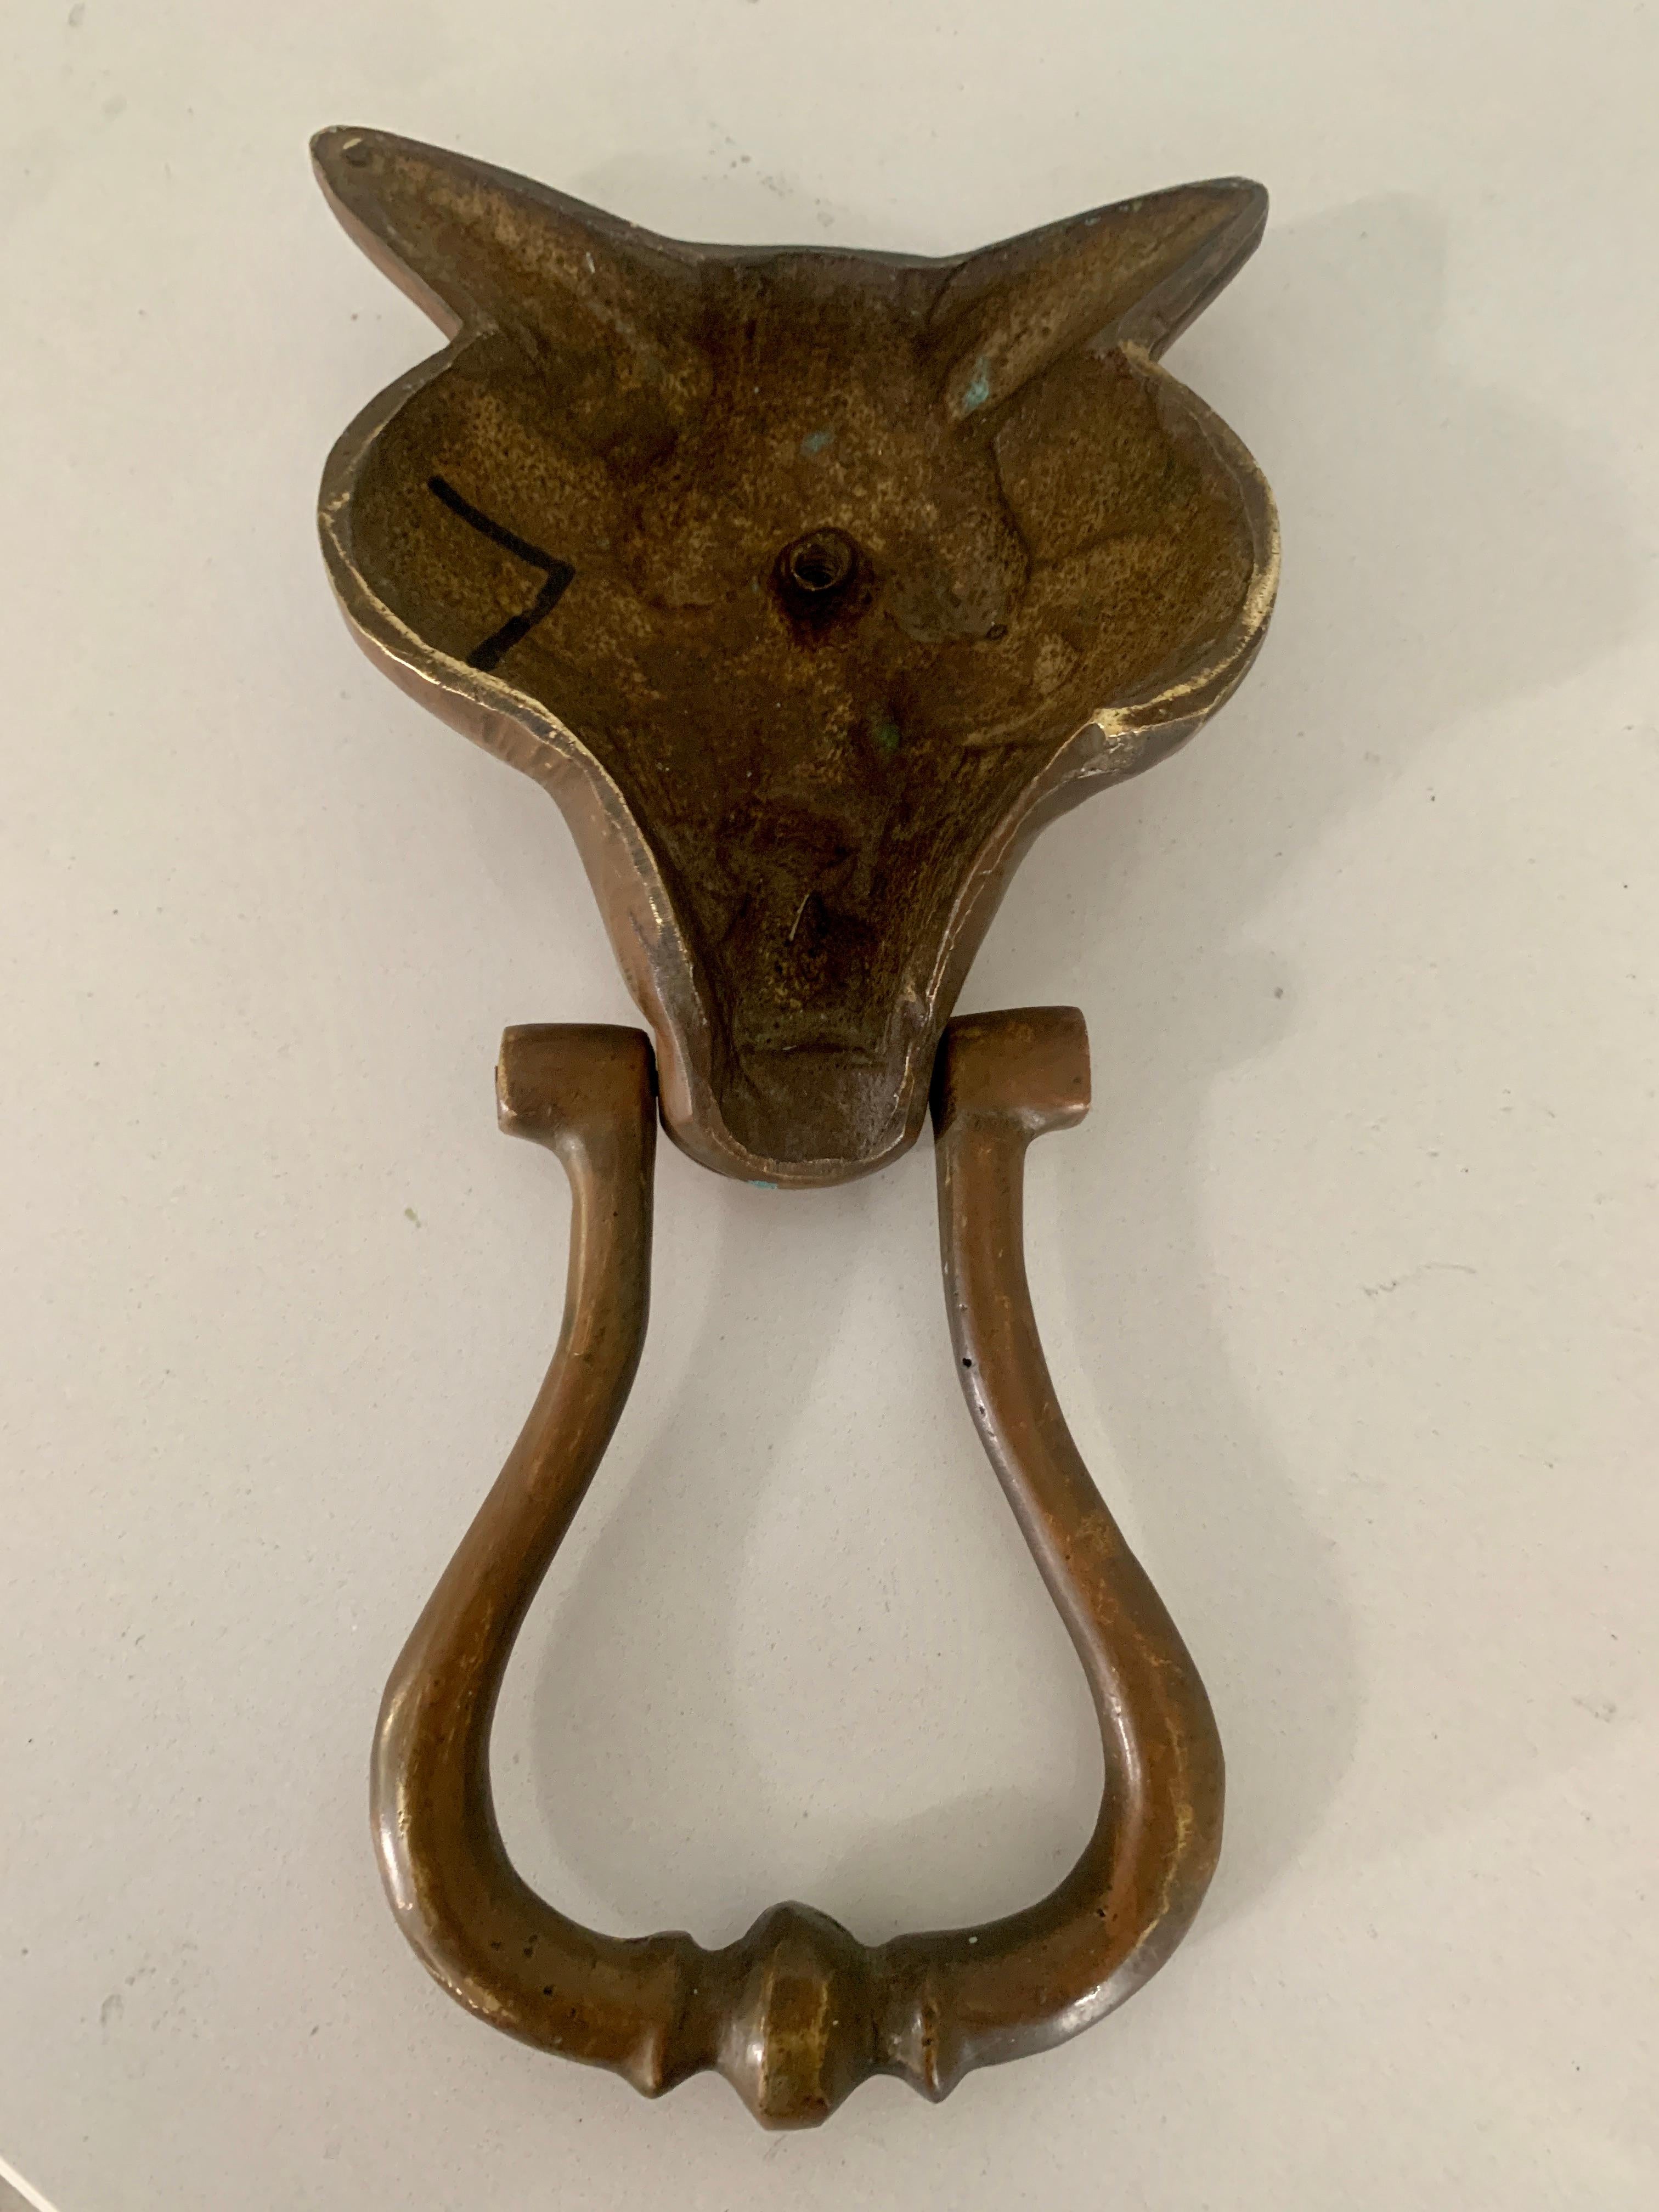 Patinated Bronze Fox Door Knocker - a wonderful knocker for your door, front, rear or side entrance. In Lore - In many cultures, the fox appears in folklore as a symbol of cunning and trickery, or as a familiar animal possessed of magic powers. In